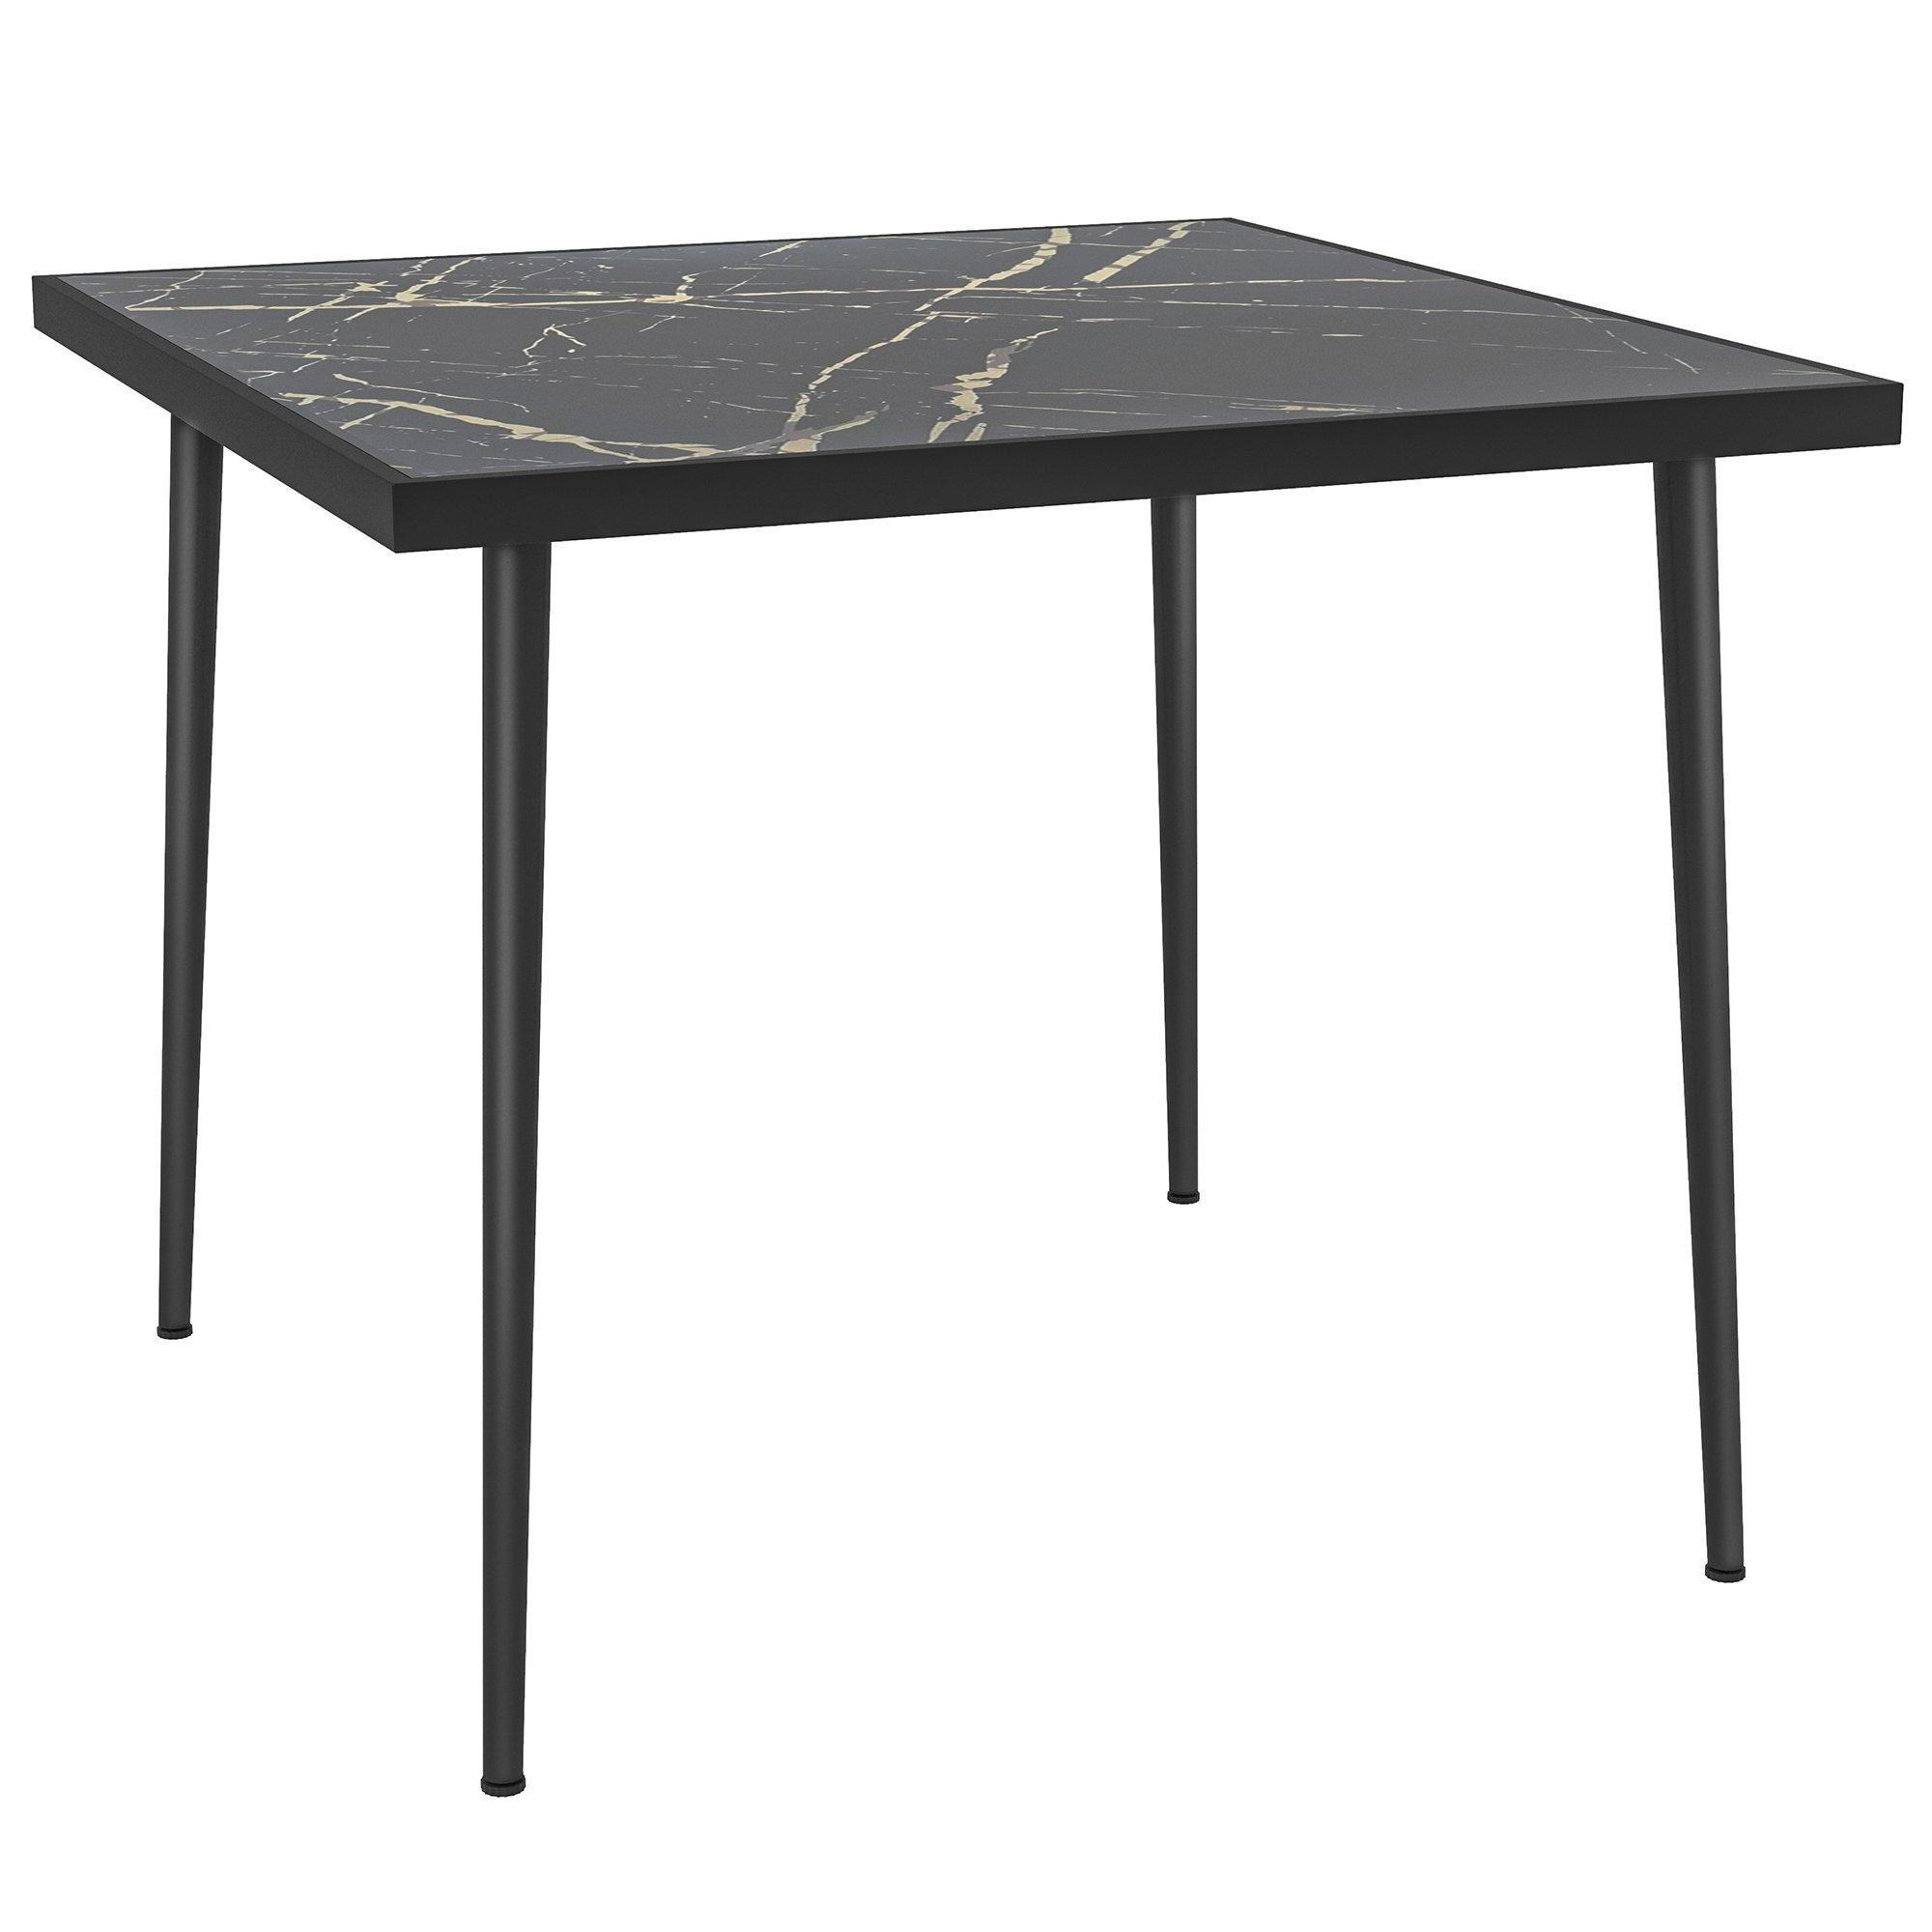 Square Outdoor Dining Table with Marble Effect Top Steel Frame for Patio - image 1